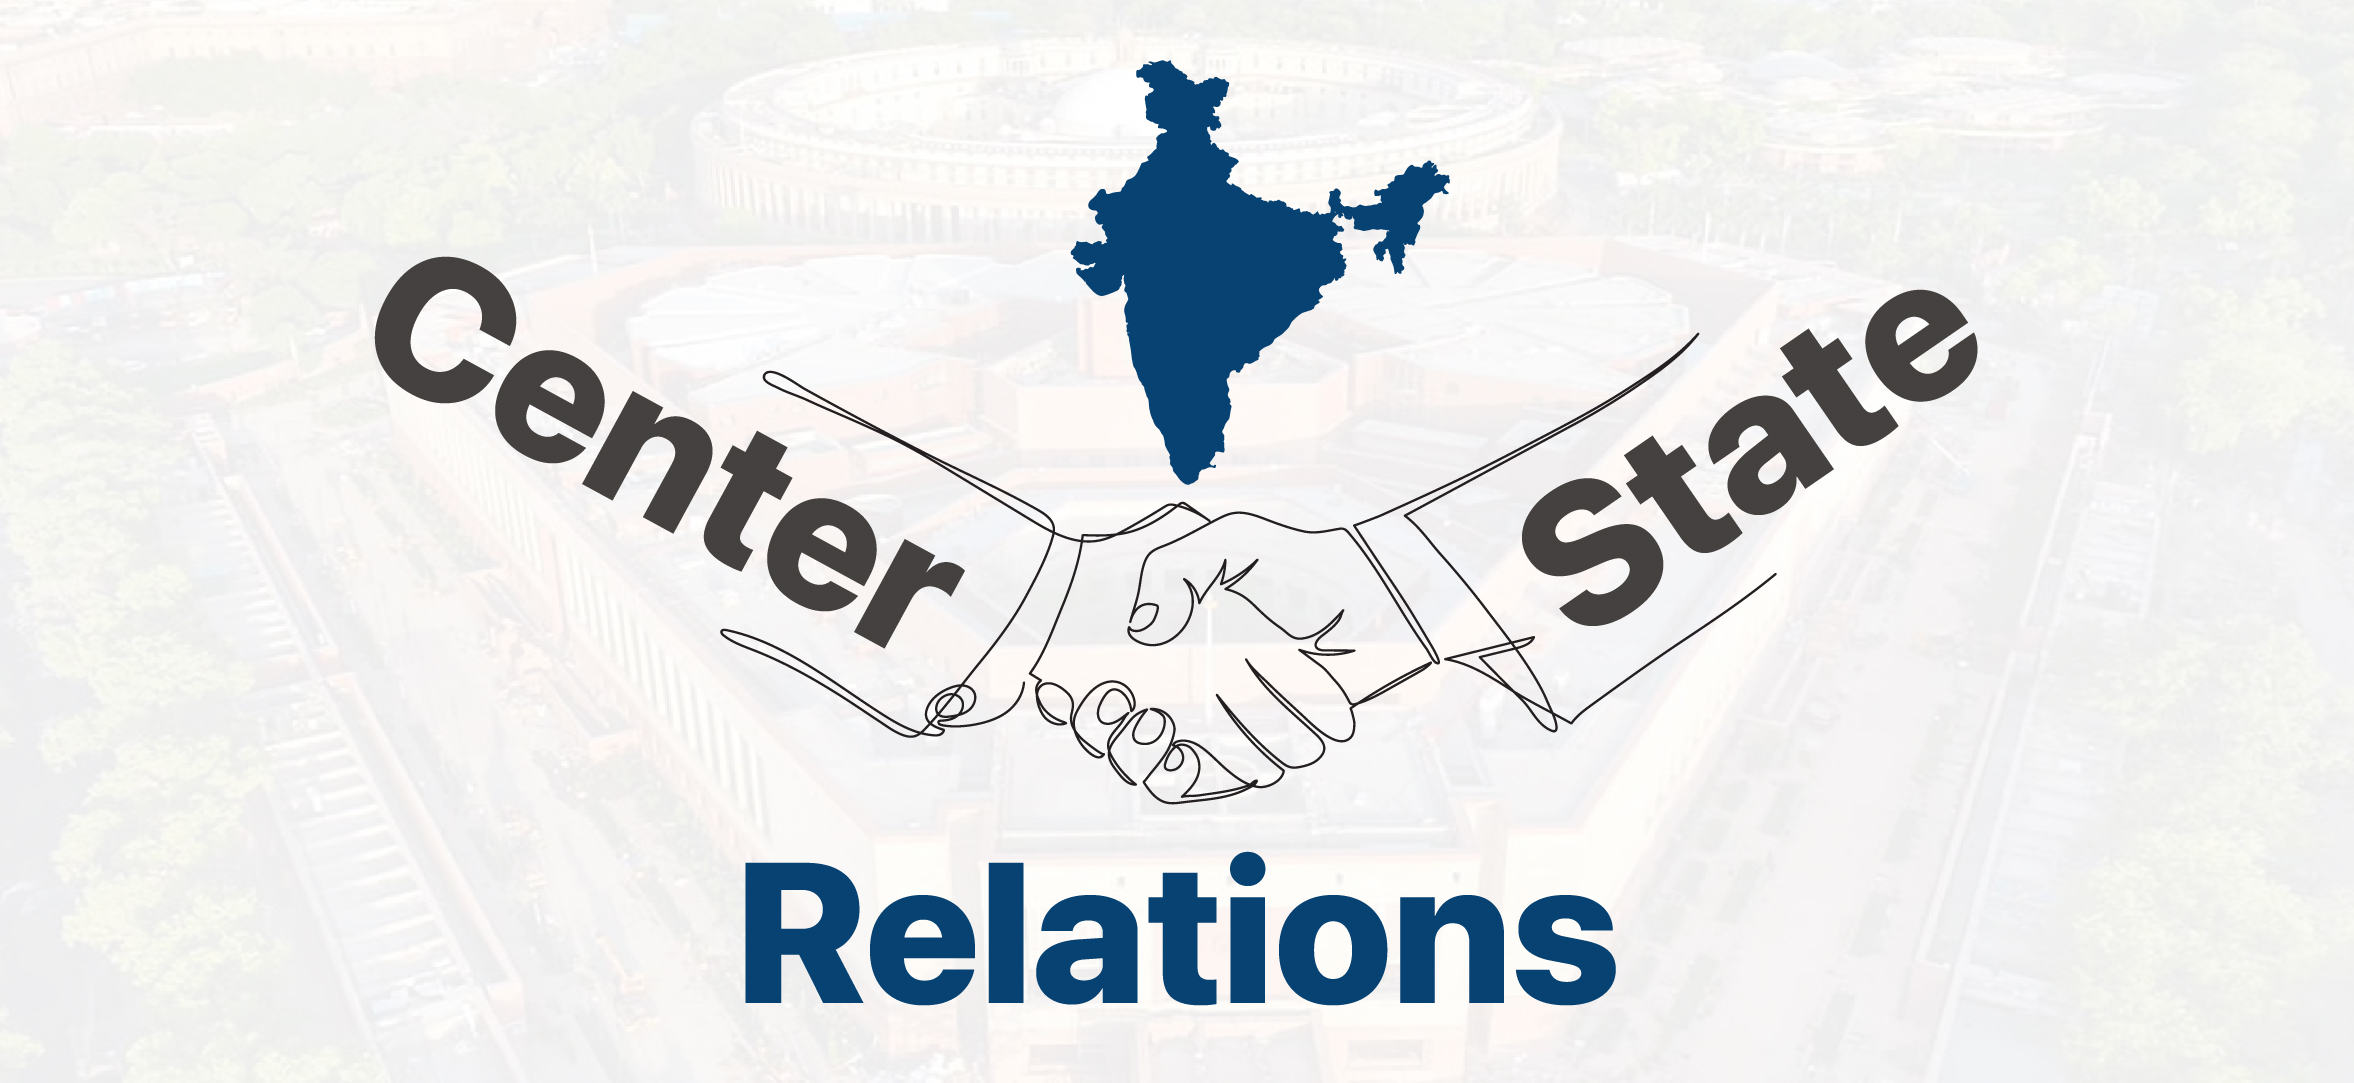 Center-State Relations